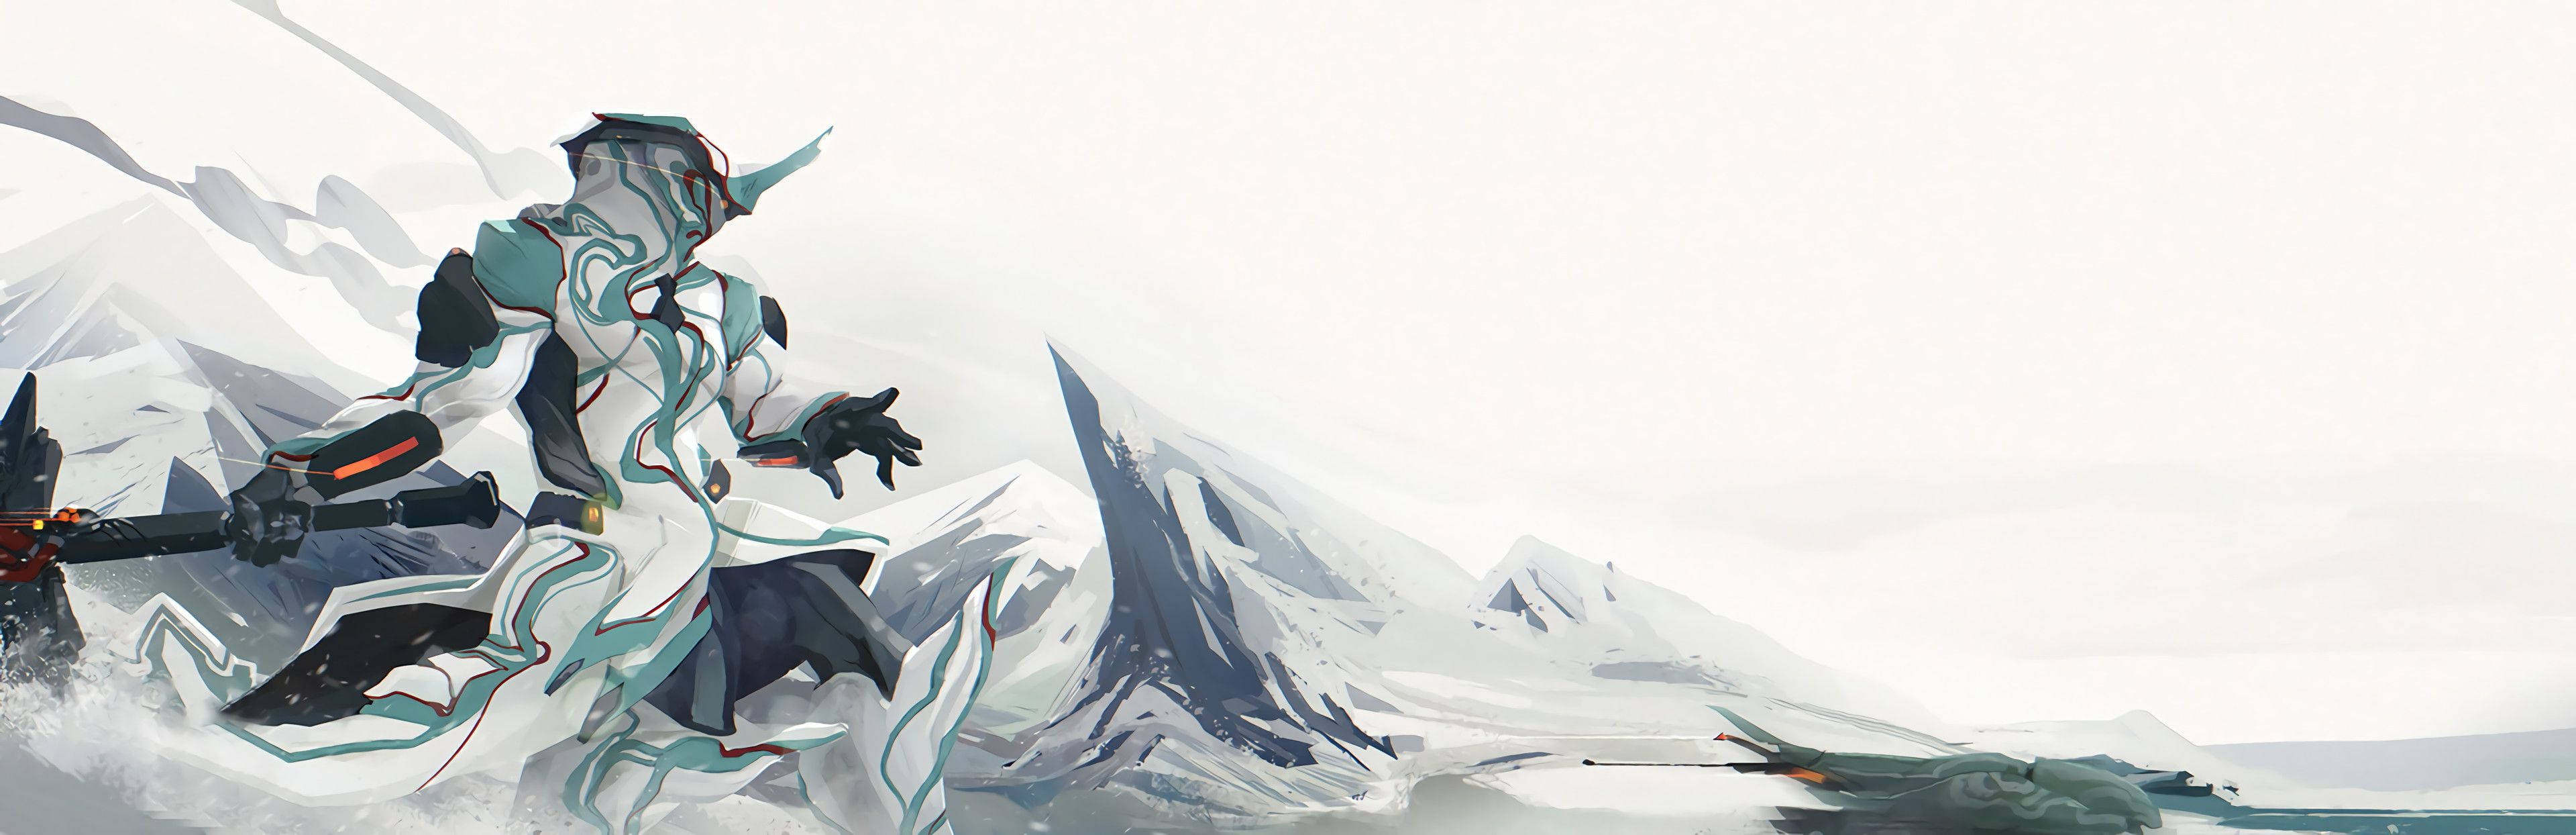 Warframe Tenno ancient soldier Frost on the snowy arctic background wallpaper.